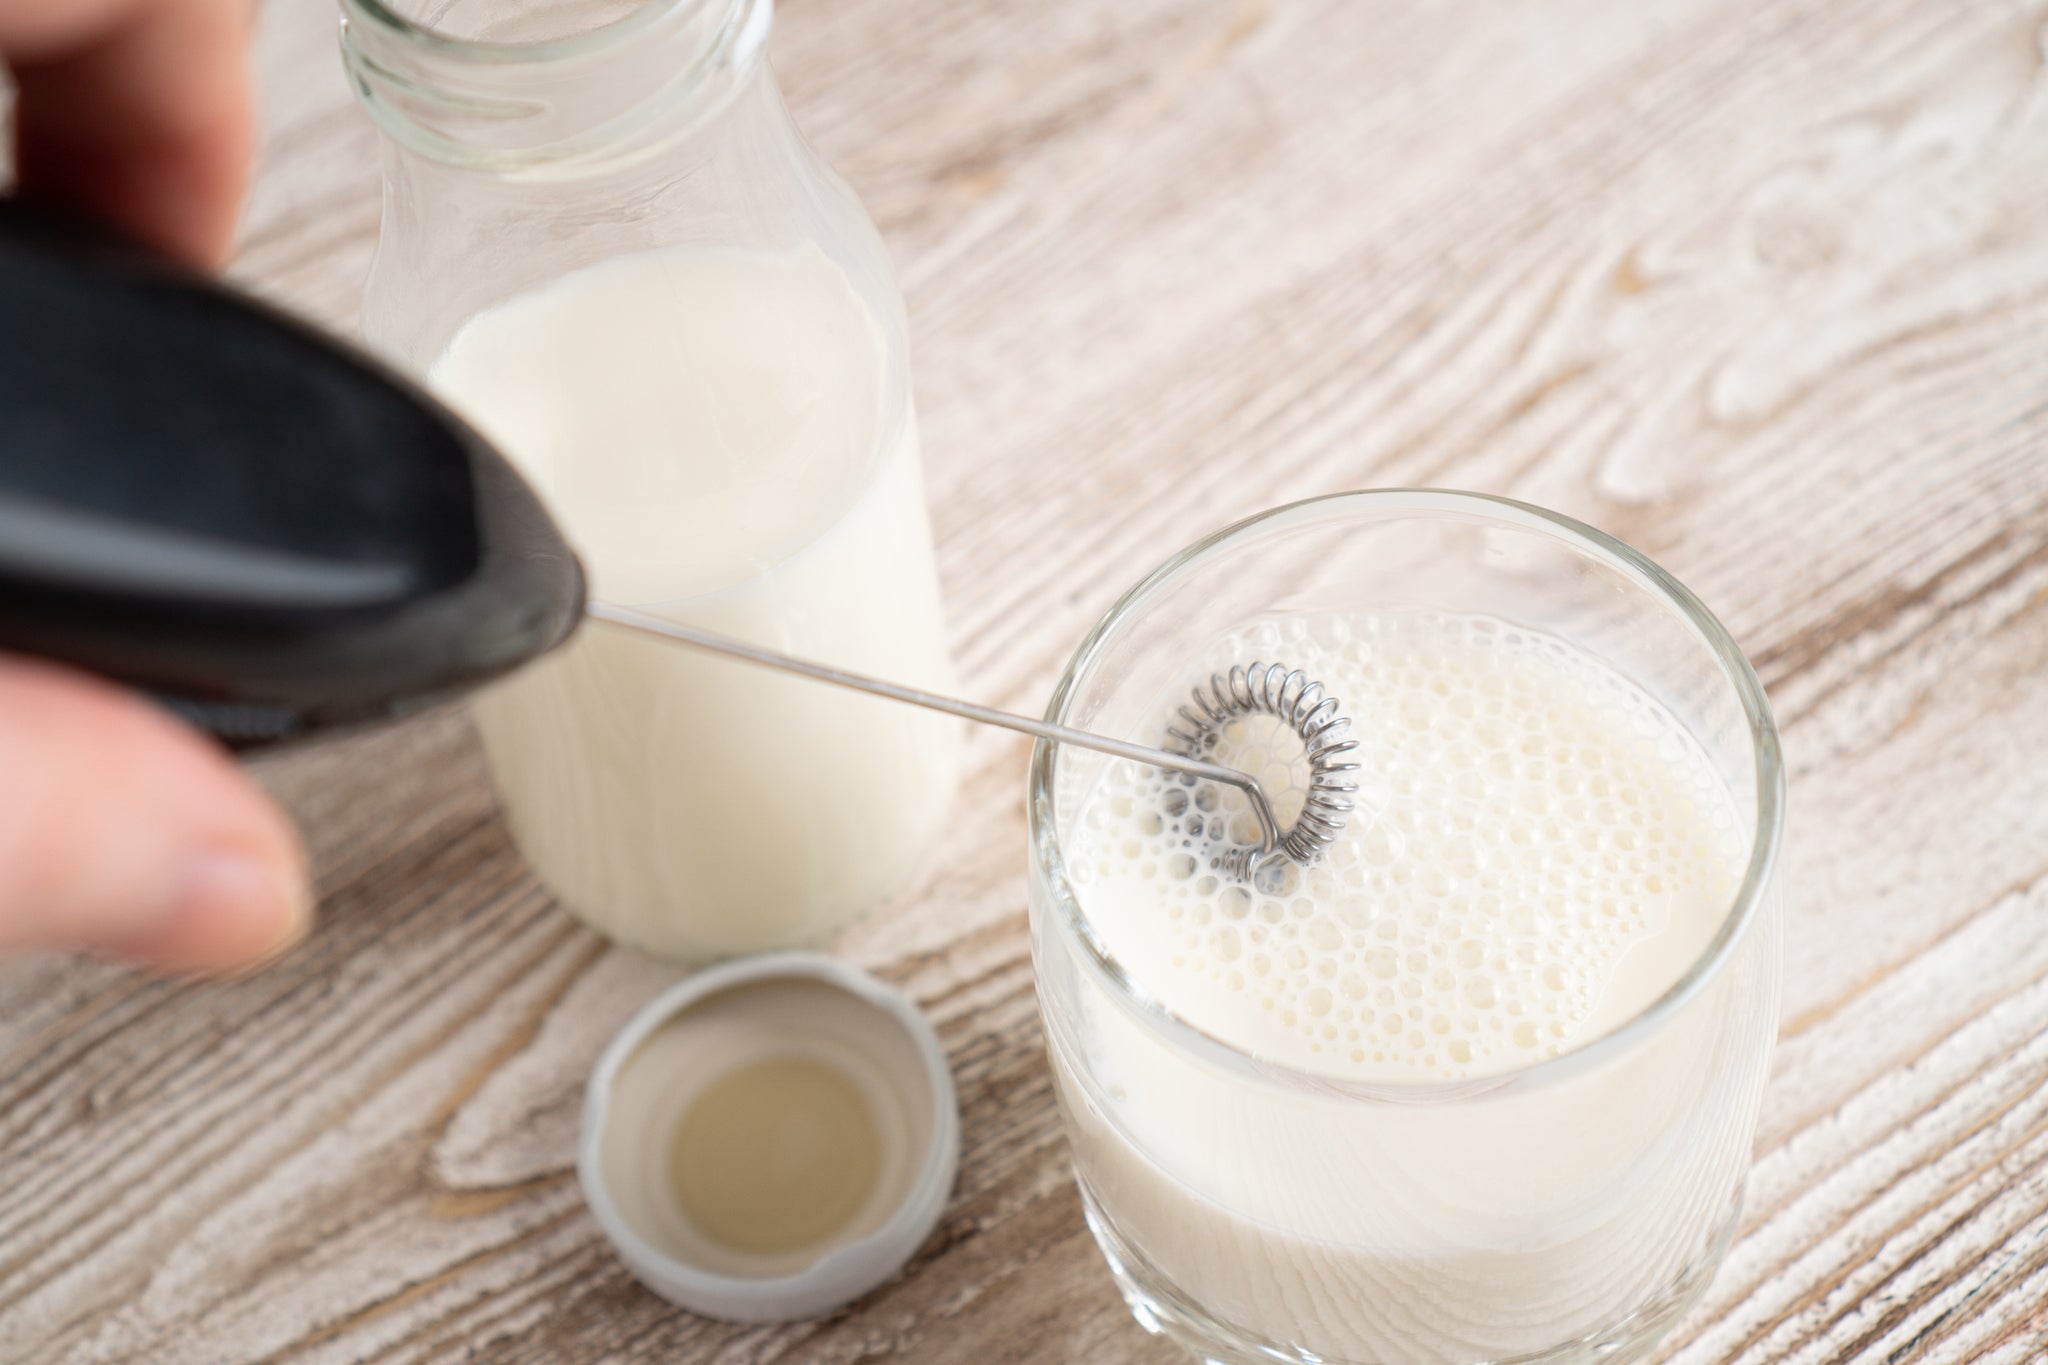 How to Froth Milk